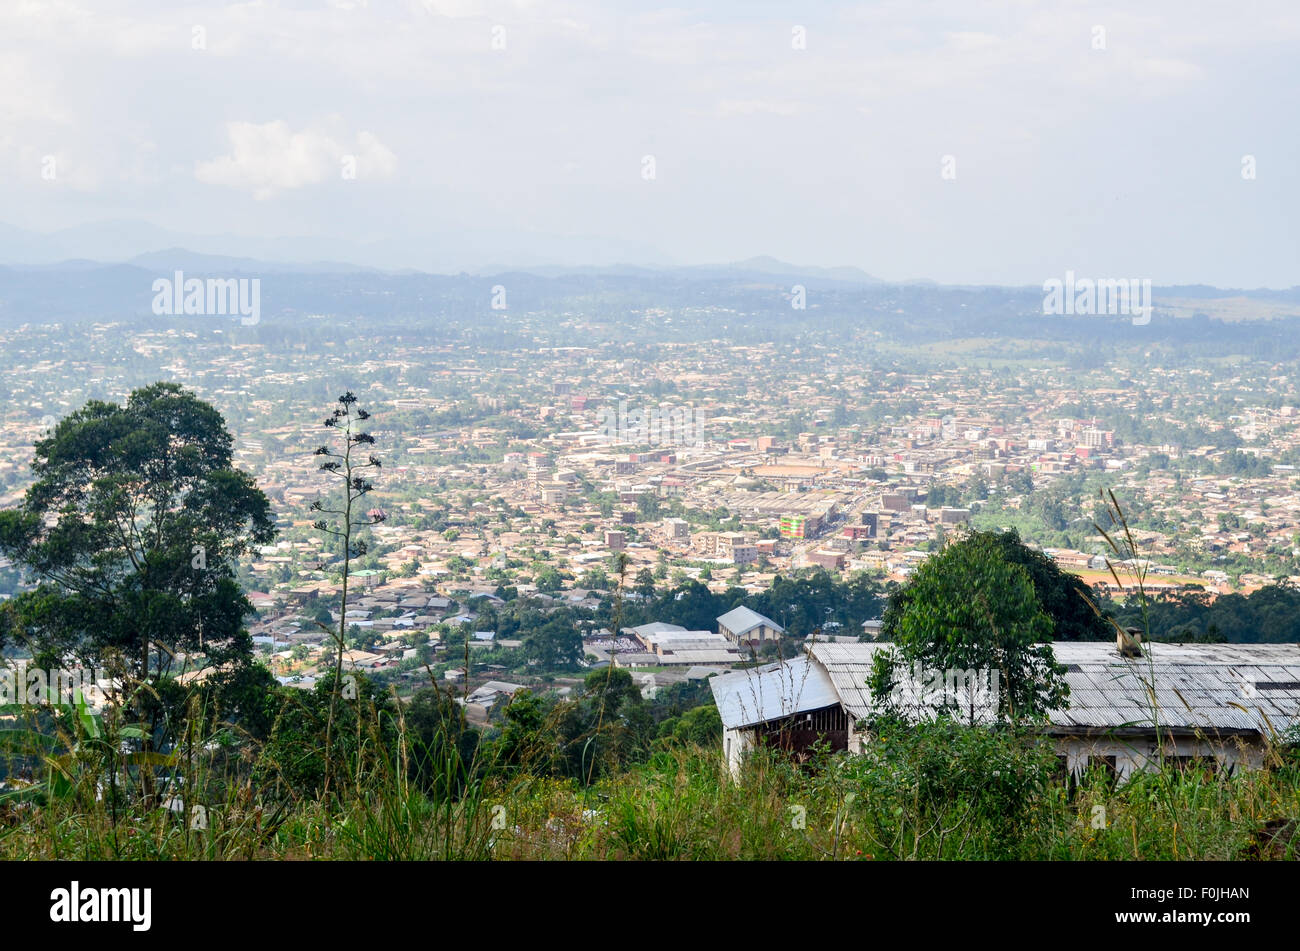 Aerial view of the city of Bamenda, Cameroon Stock Photo